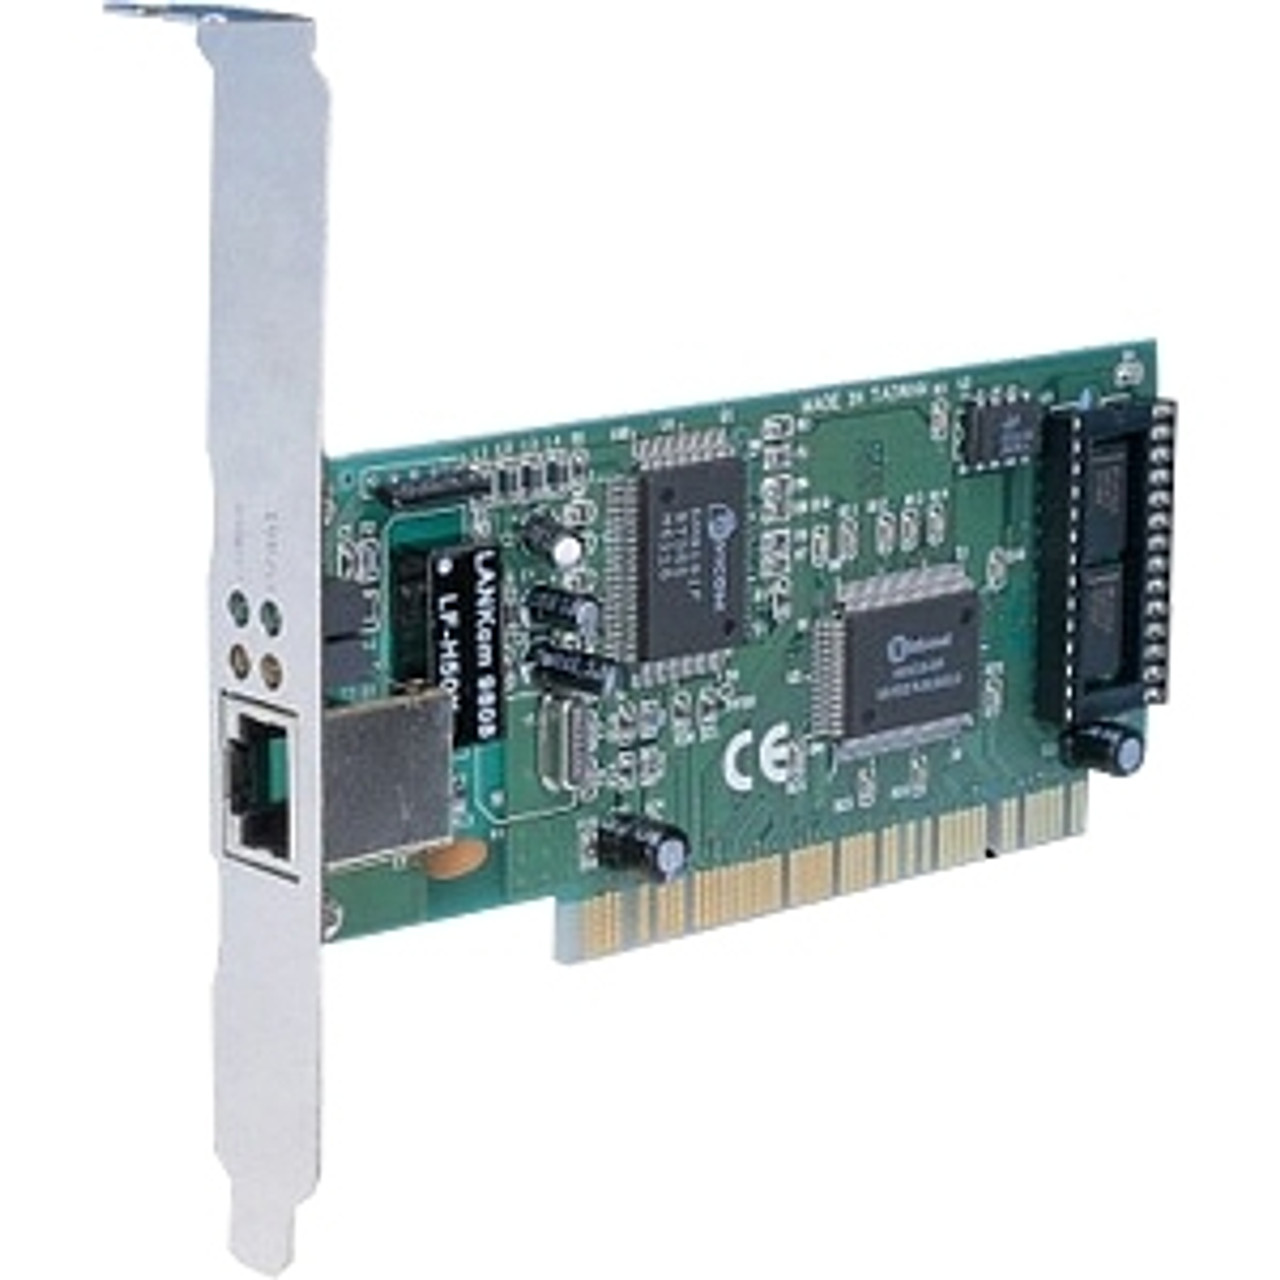 TE100-PCIE TRENDnet 10/100Mbps Fast Ethernet PCI Card